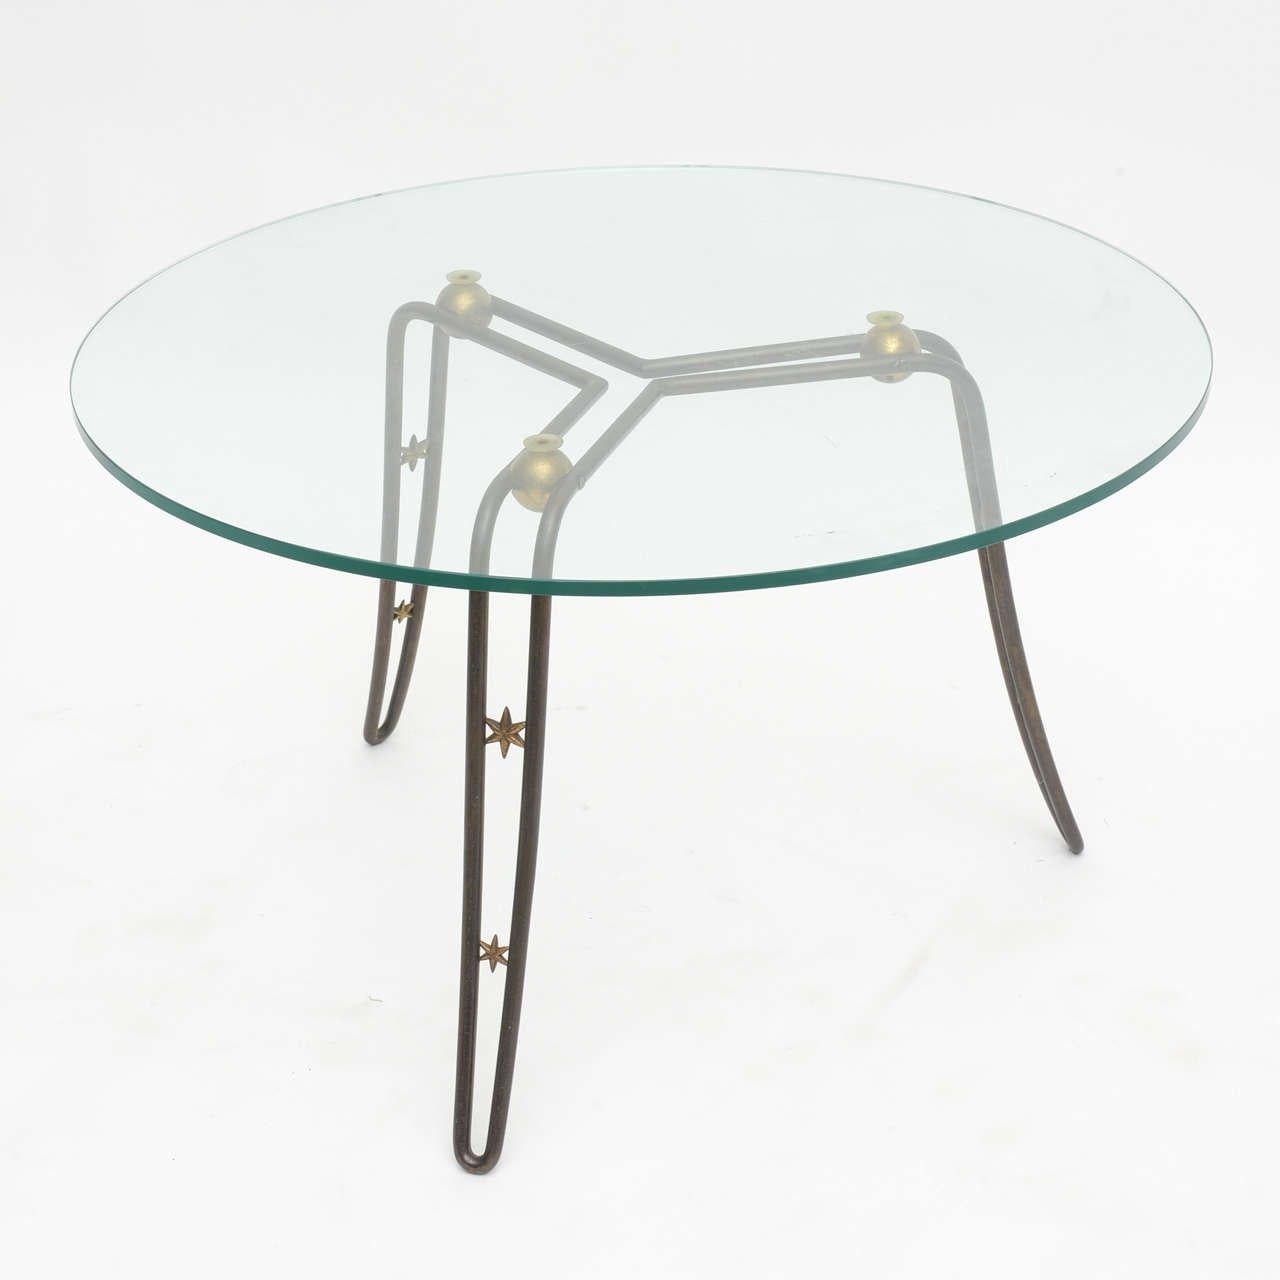 The circular top above a steel frame with three legs accented by brass stars and spheres-can accommodate glass top up to 42